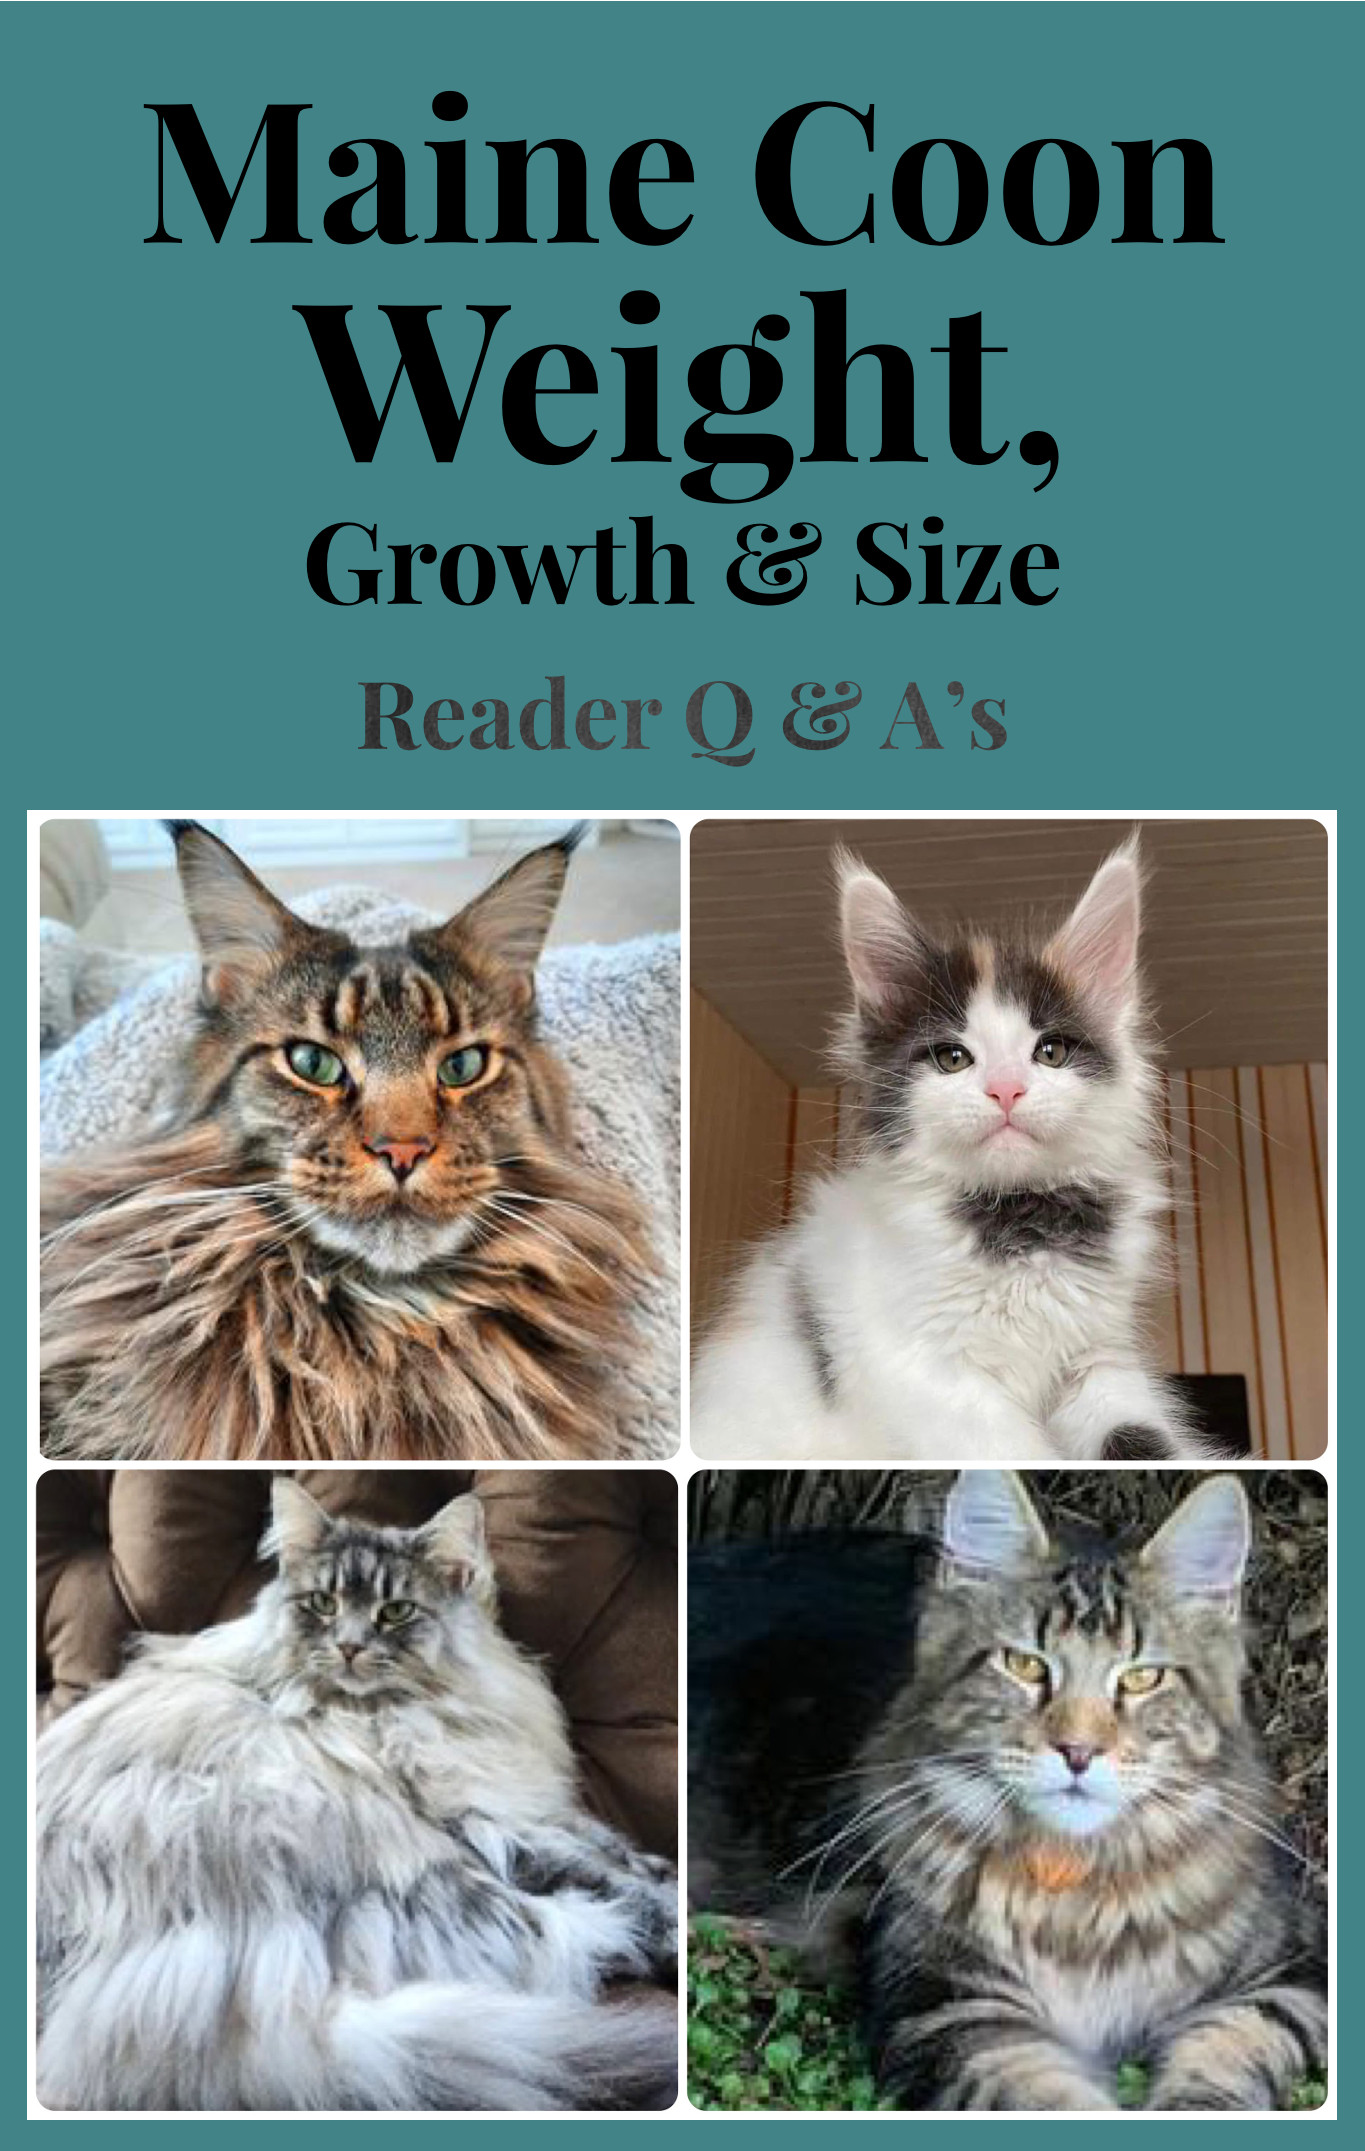 wijs dwaas invoer Maine Coon Weight, Growth & Size